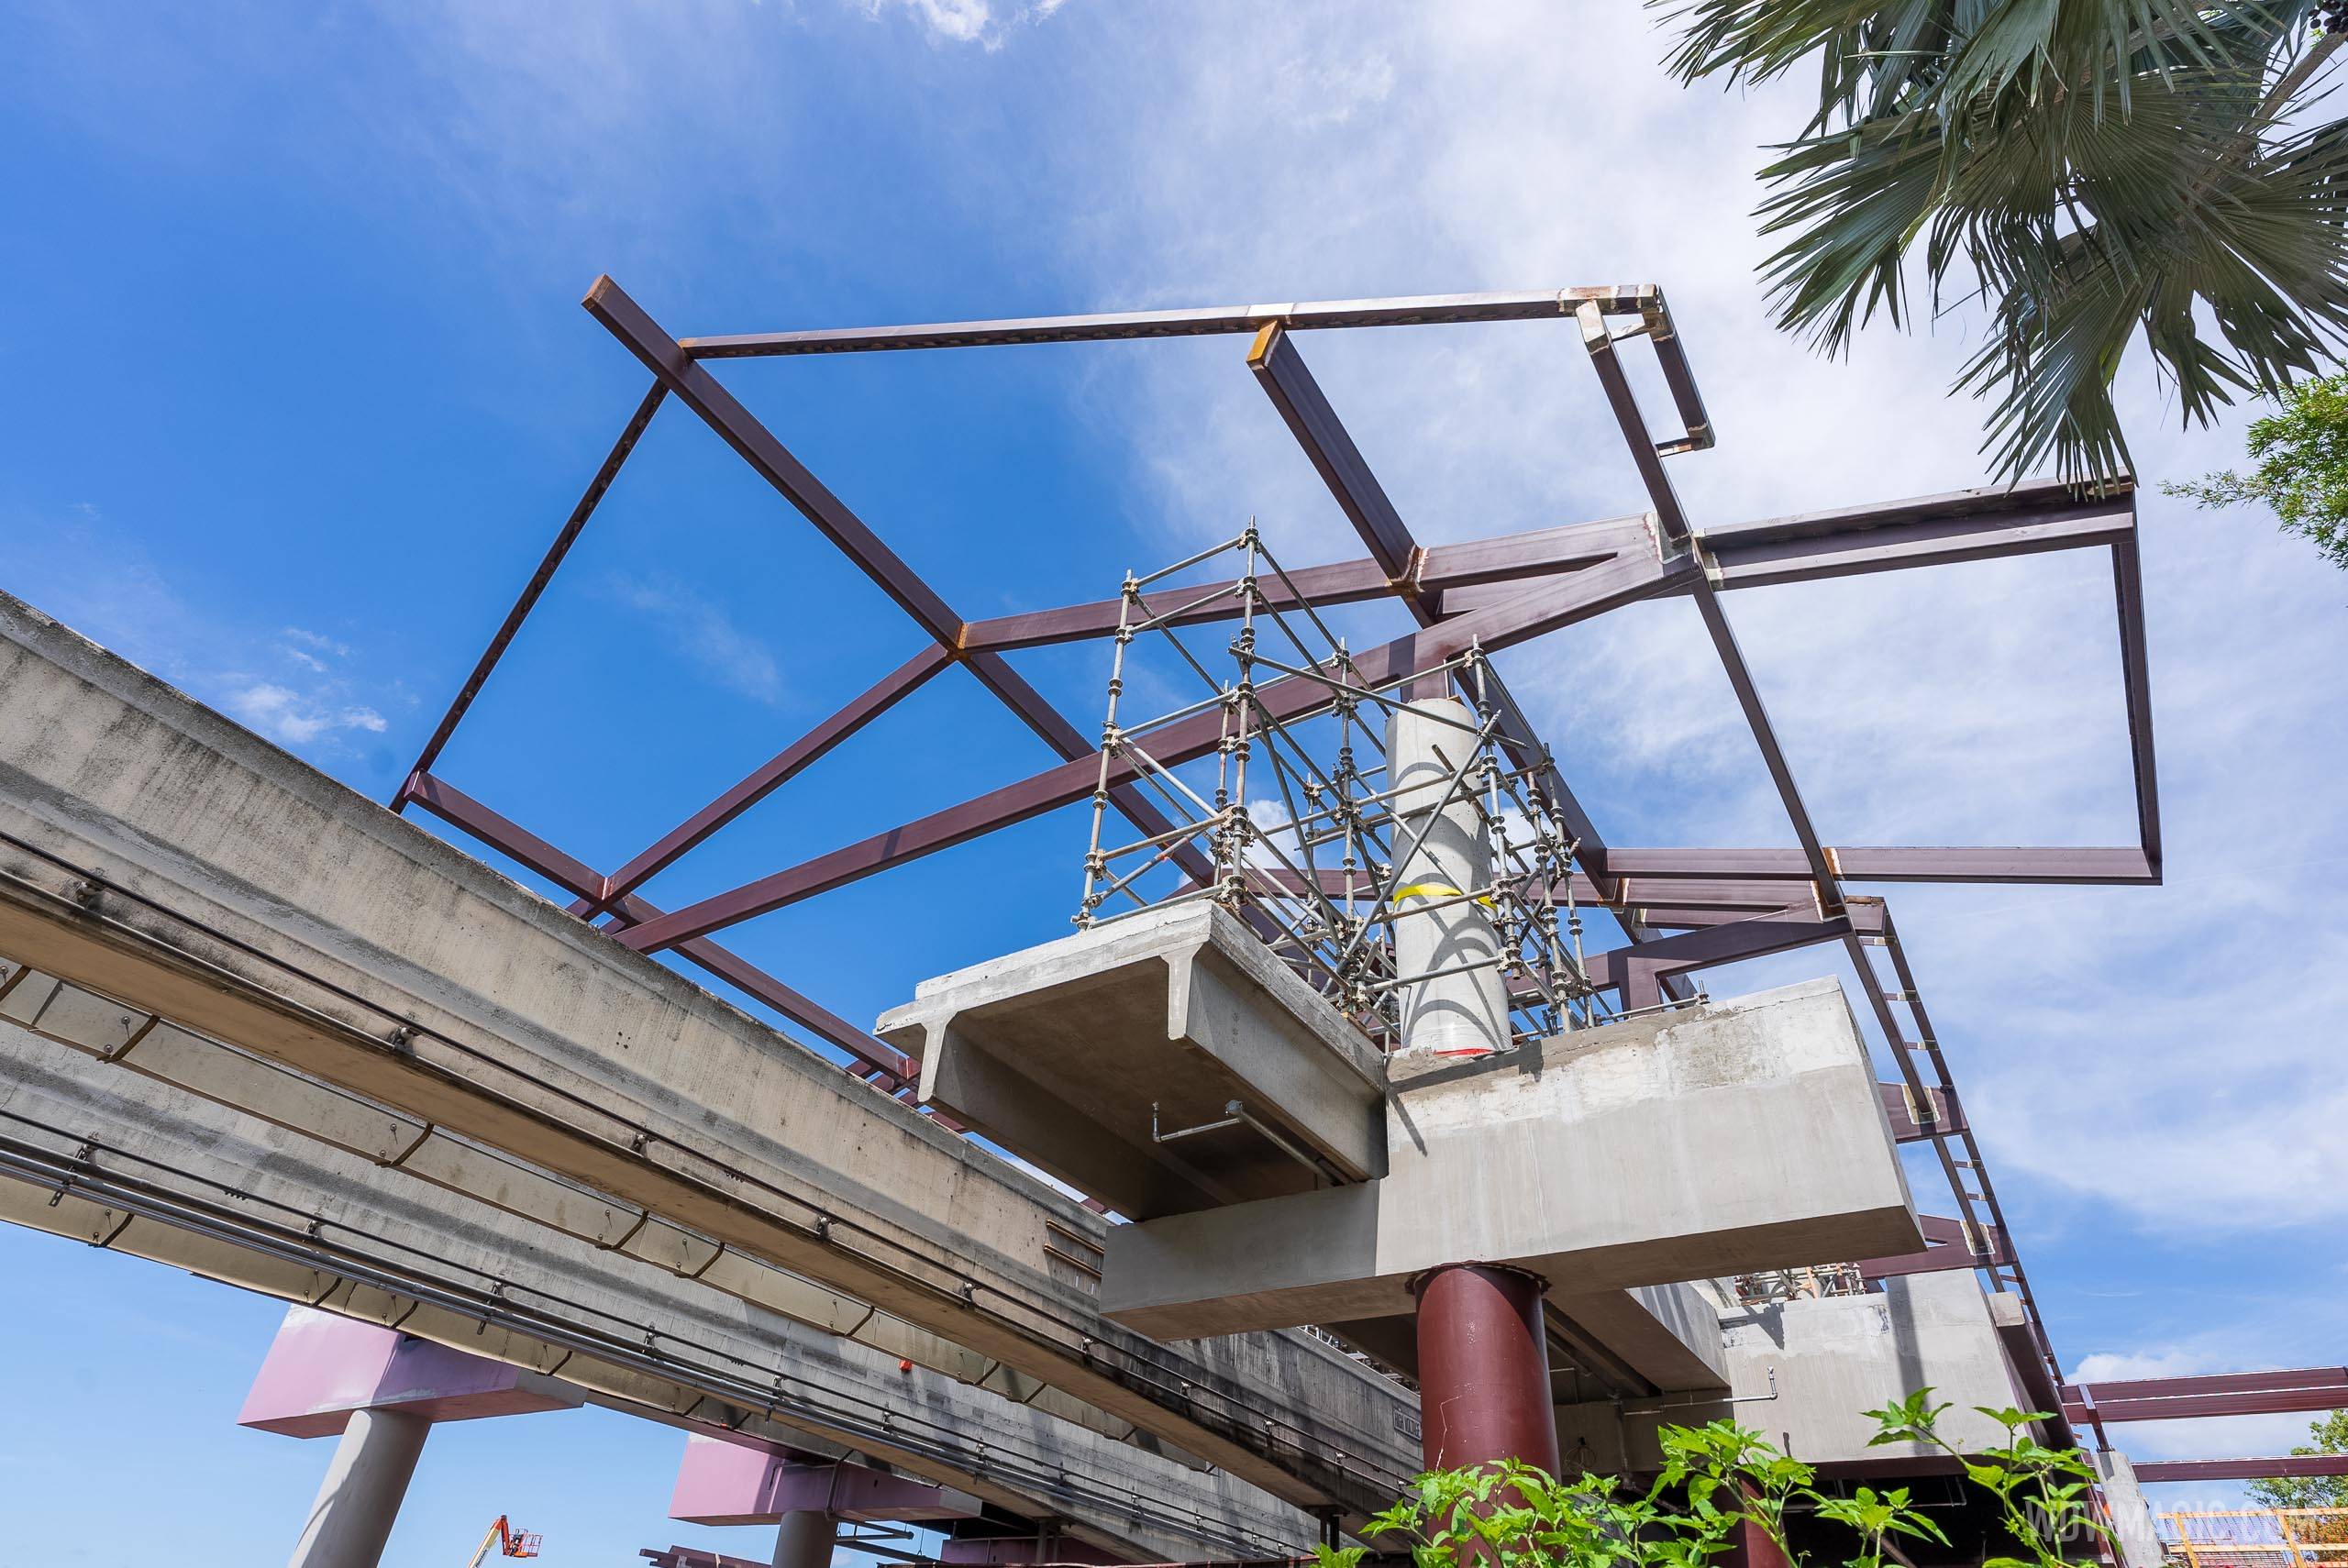 The roofline under construction over the monorail station